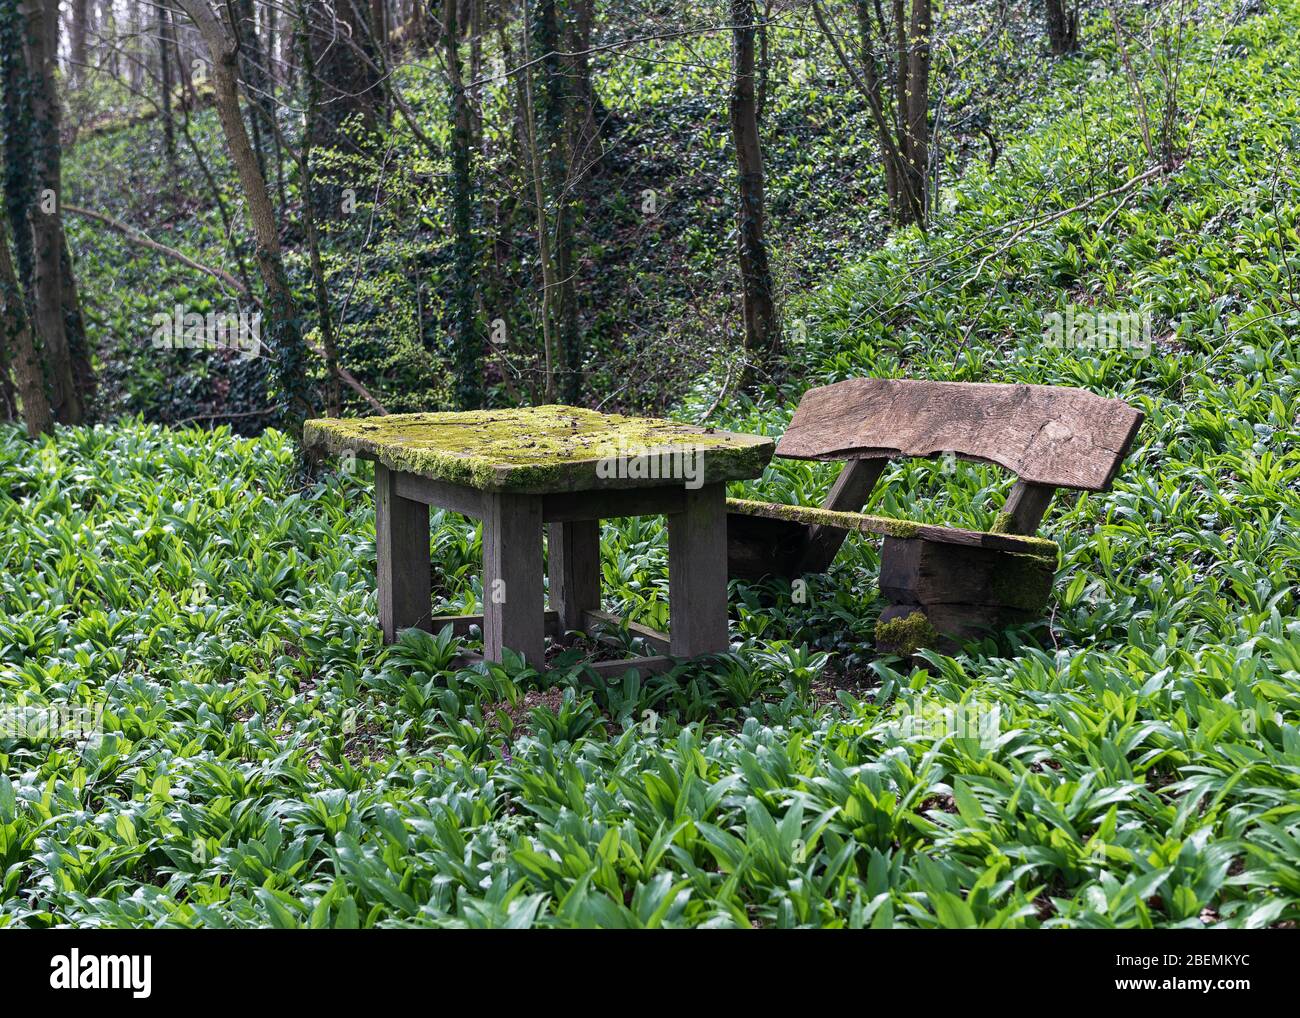 Moss covered table and wooden bench  for picnic or relaxation around the wild garlic plants in the forest. Stock Photo